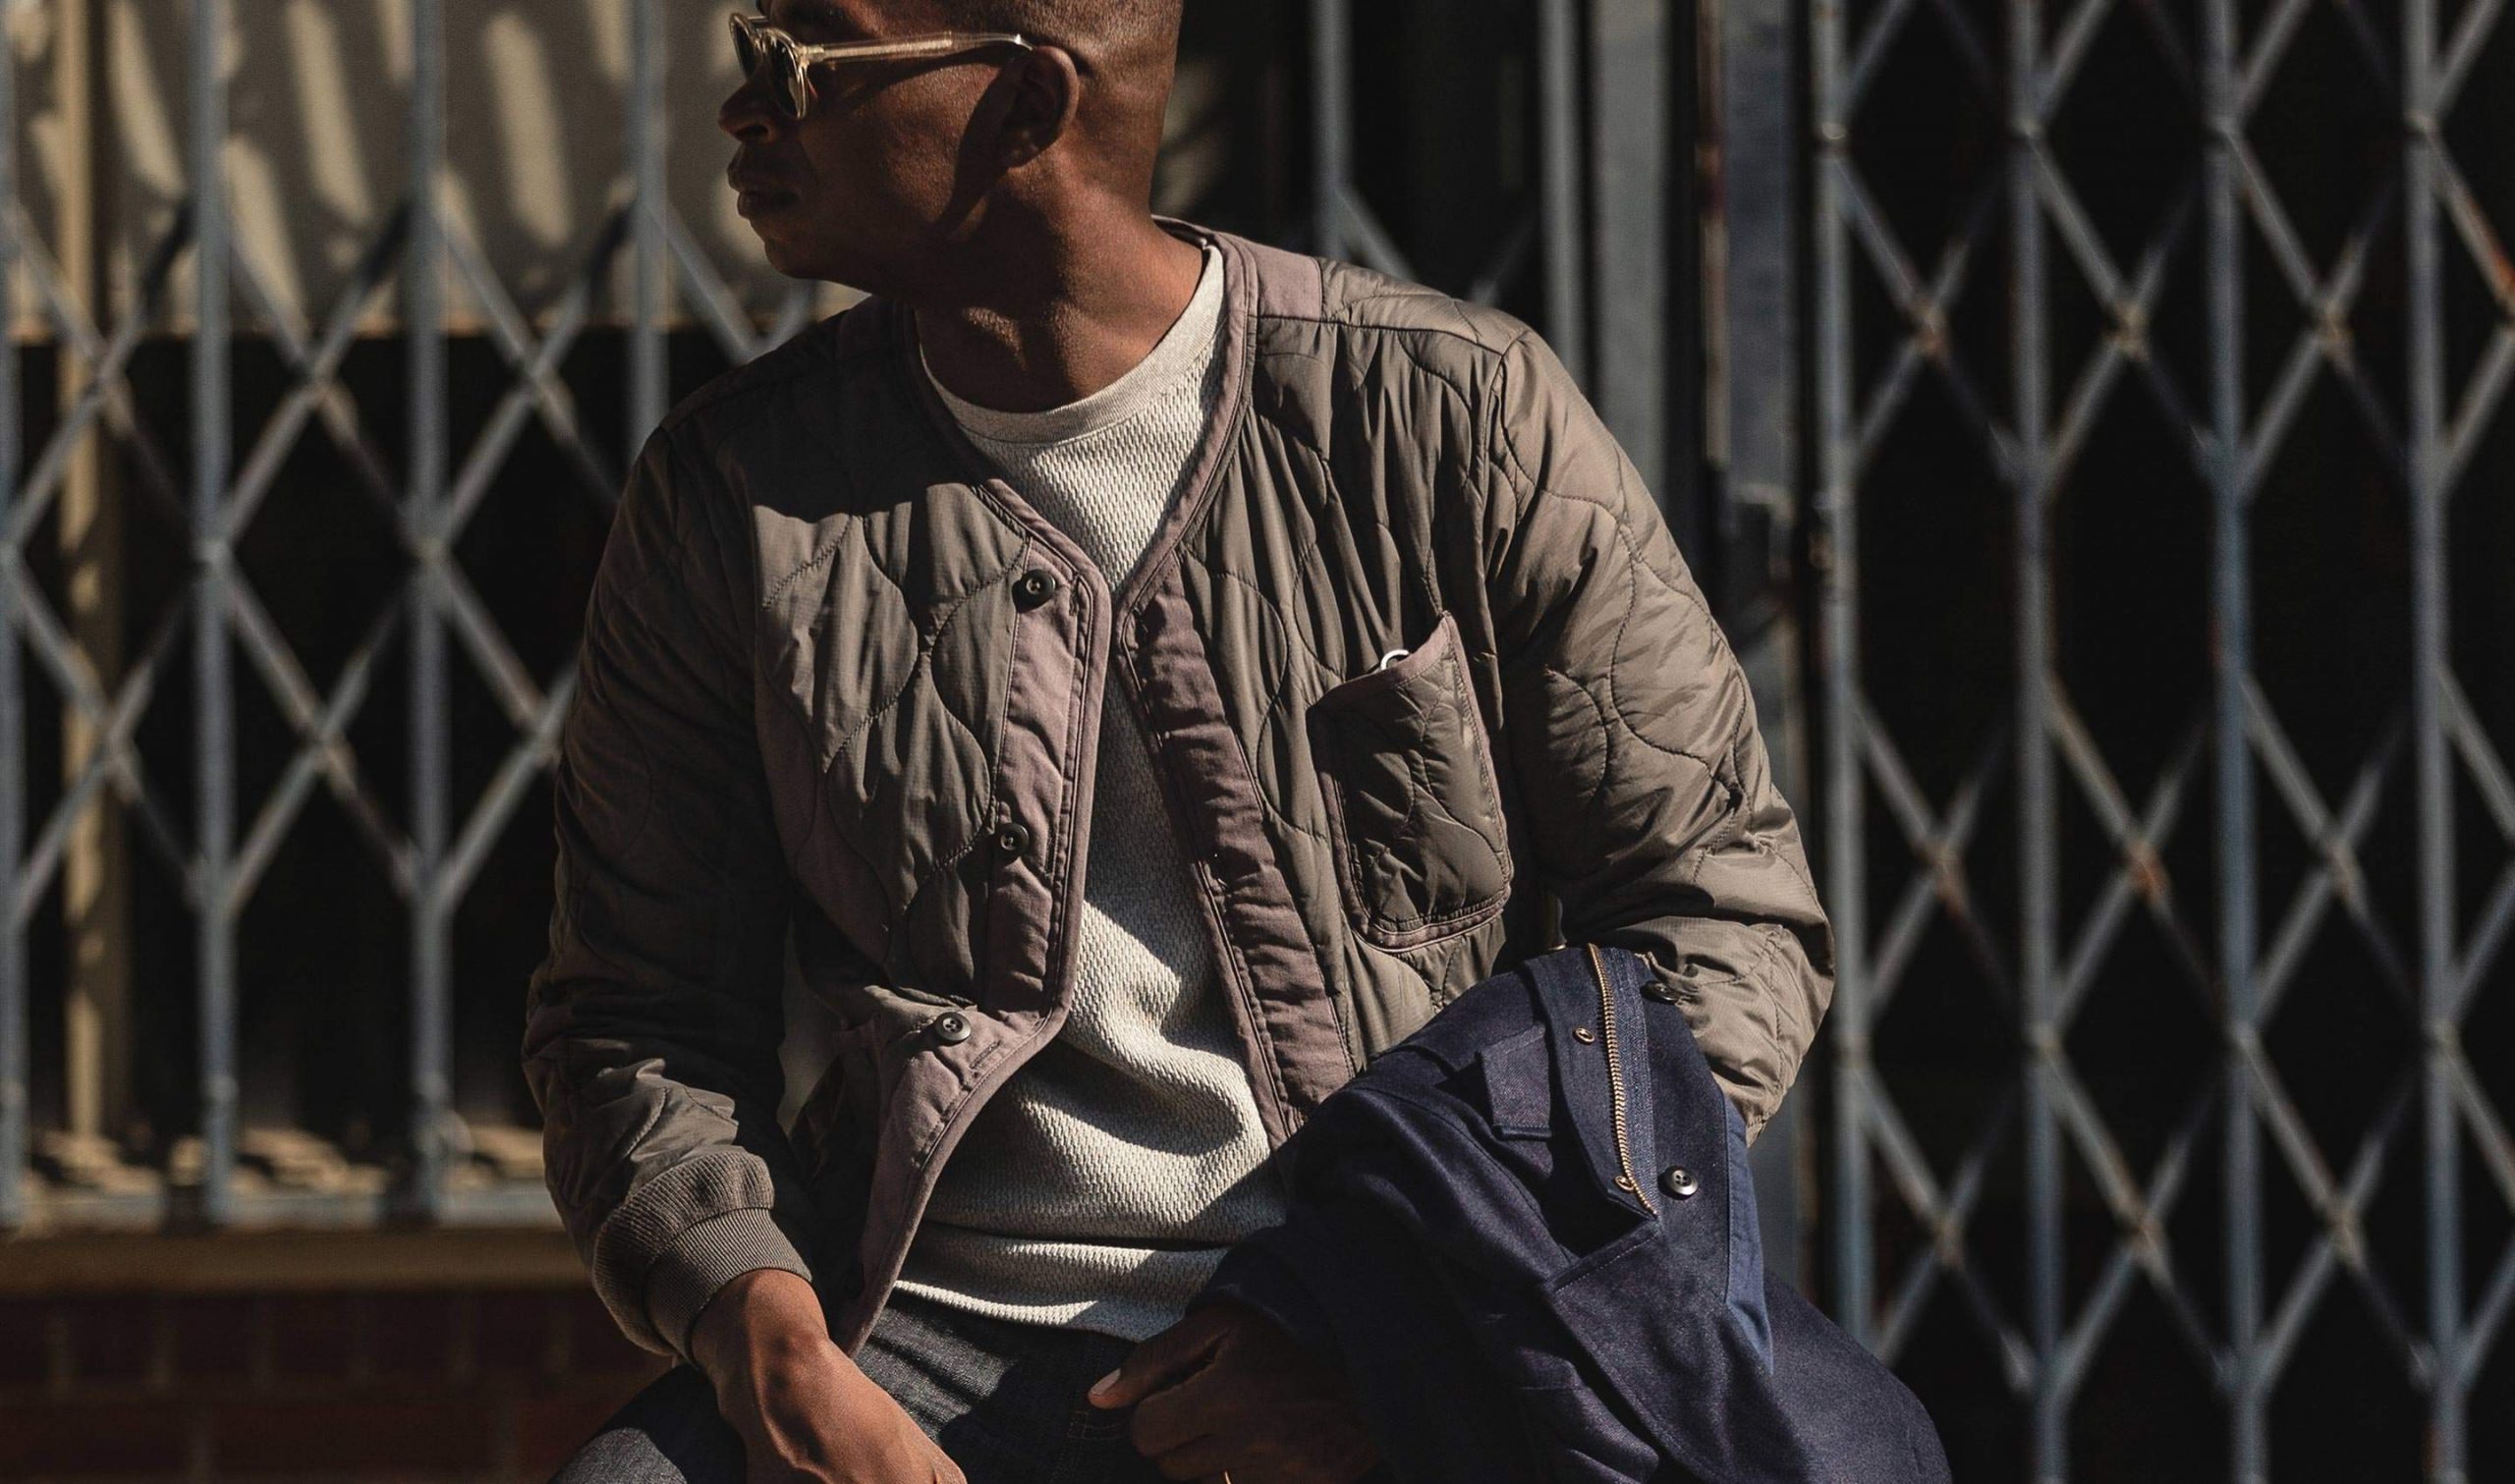 Jacket | The Industries Coolector Stitch Taylor Alpha x ALS/92